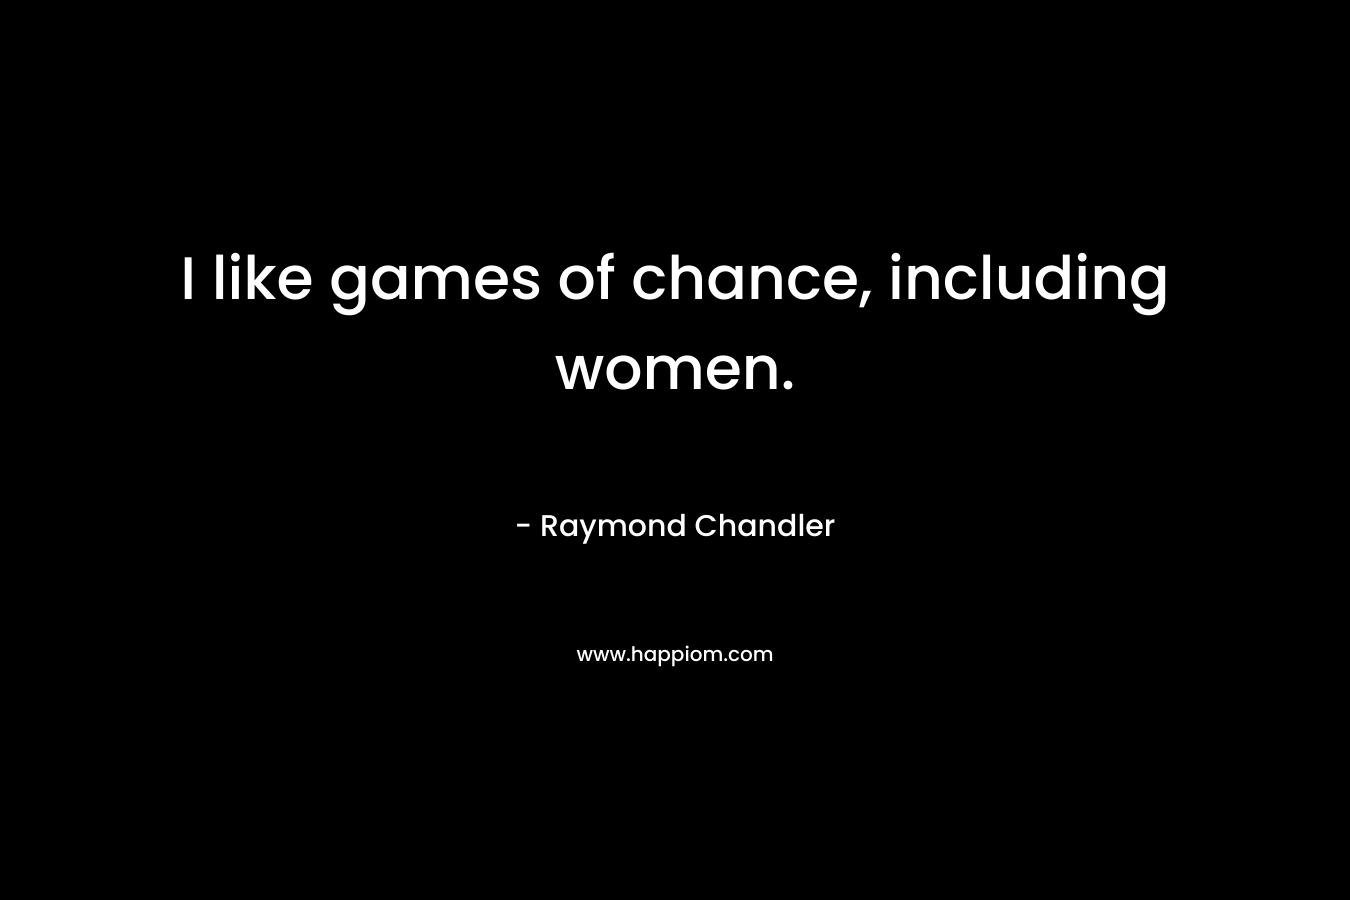 I like games of chance, including women.